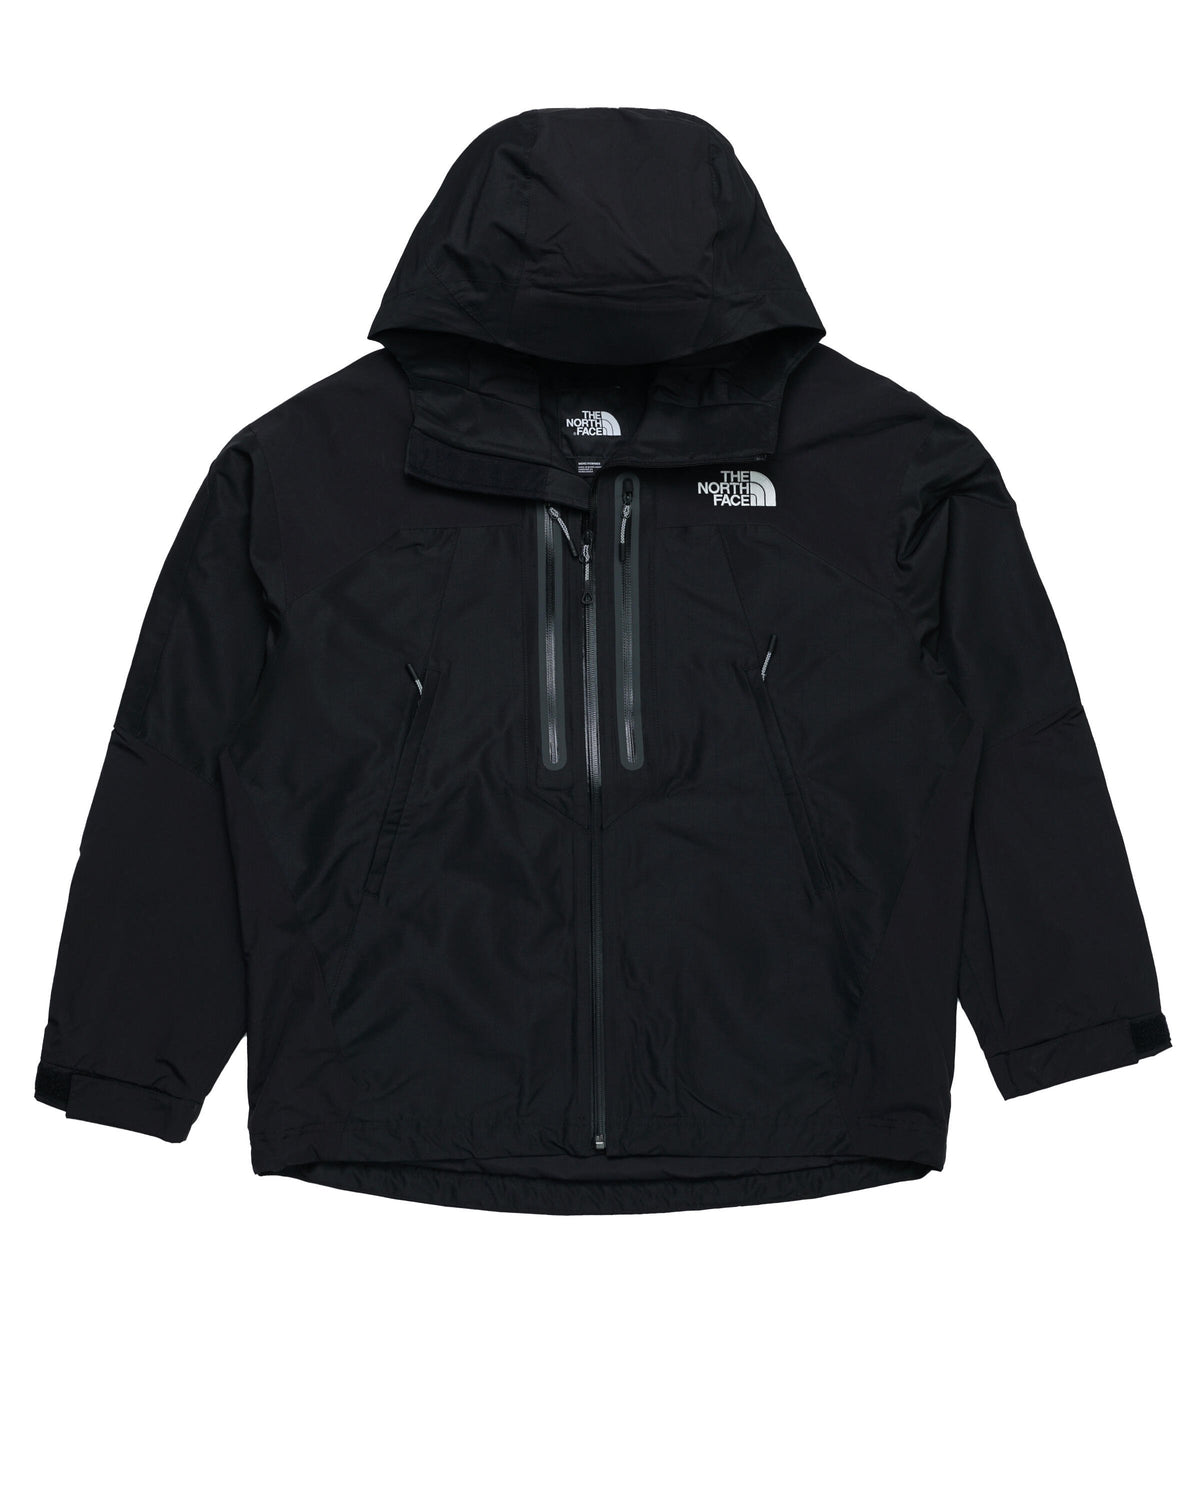 The North Face Transverse 2l DryVent Jacket